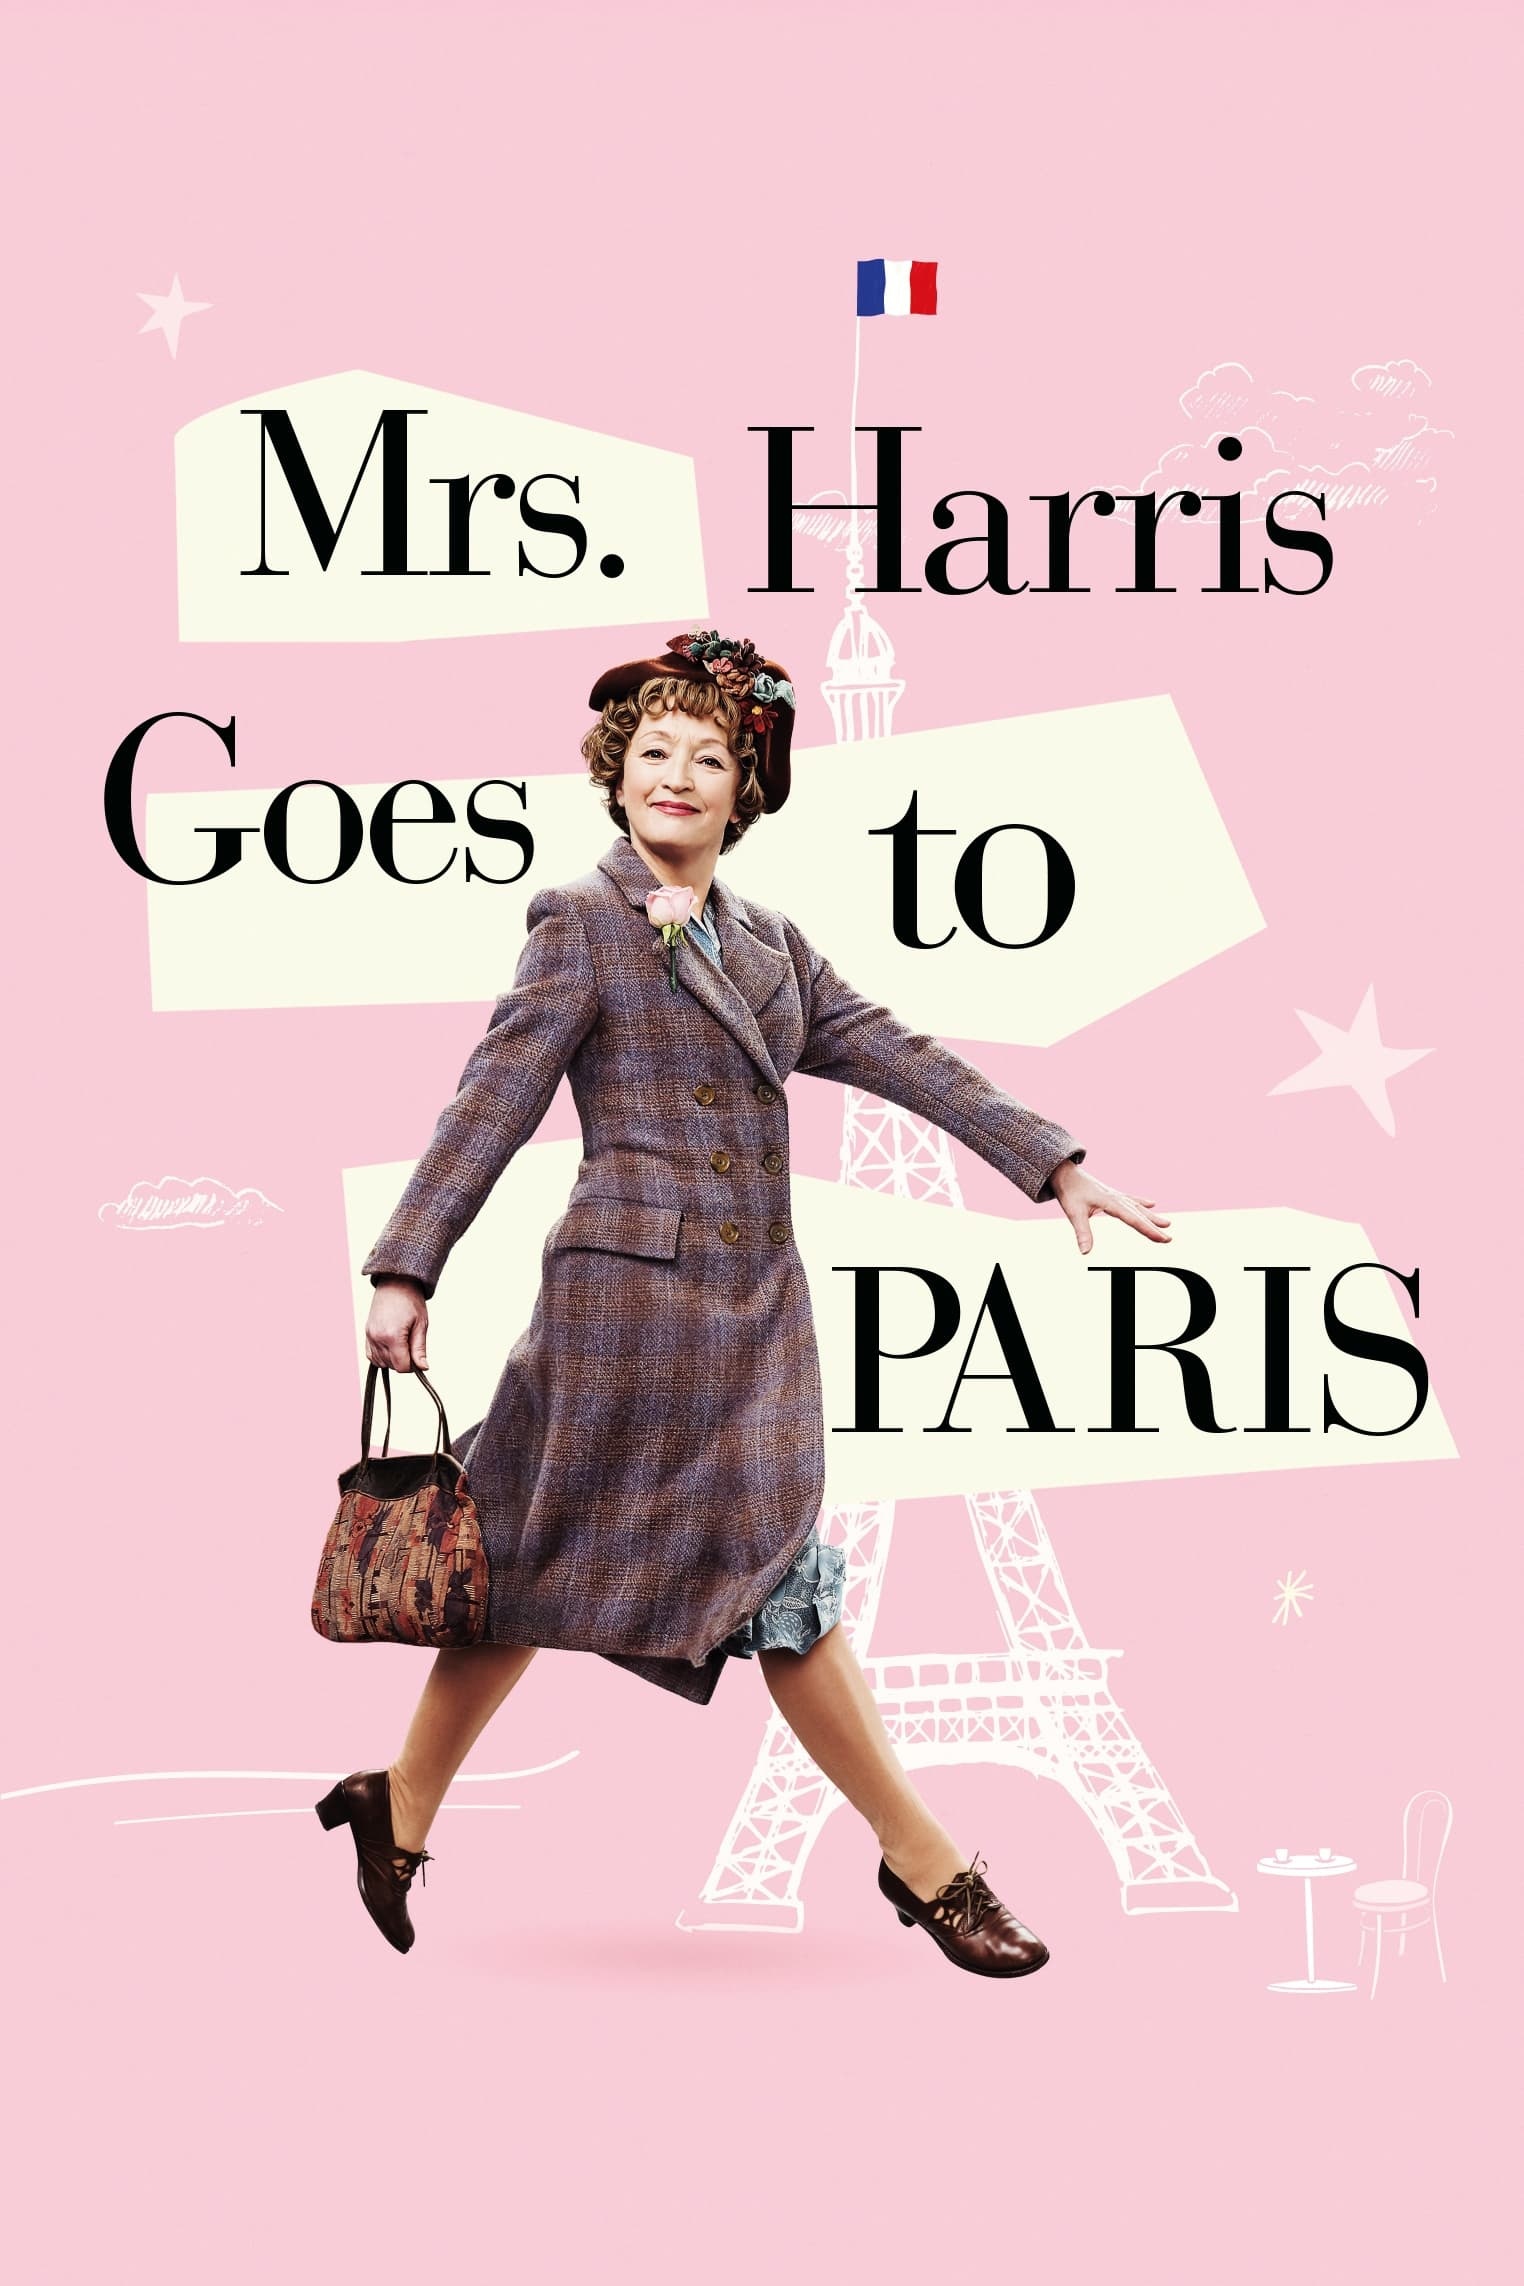 Mrs Harris Goes to Paris, CW Theaters, Lincoln movie theater, Fashionable journey, 1530x2290 HD Phone